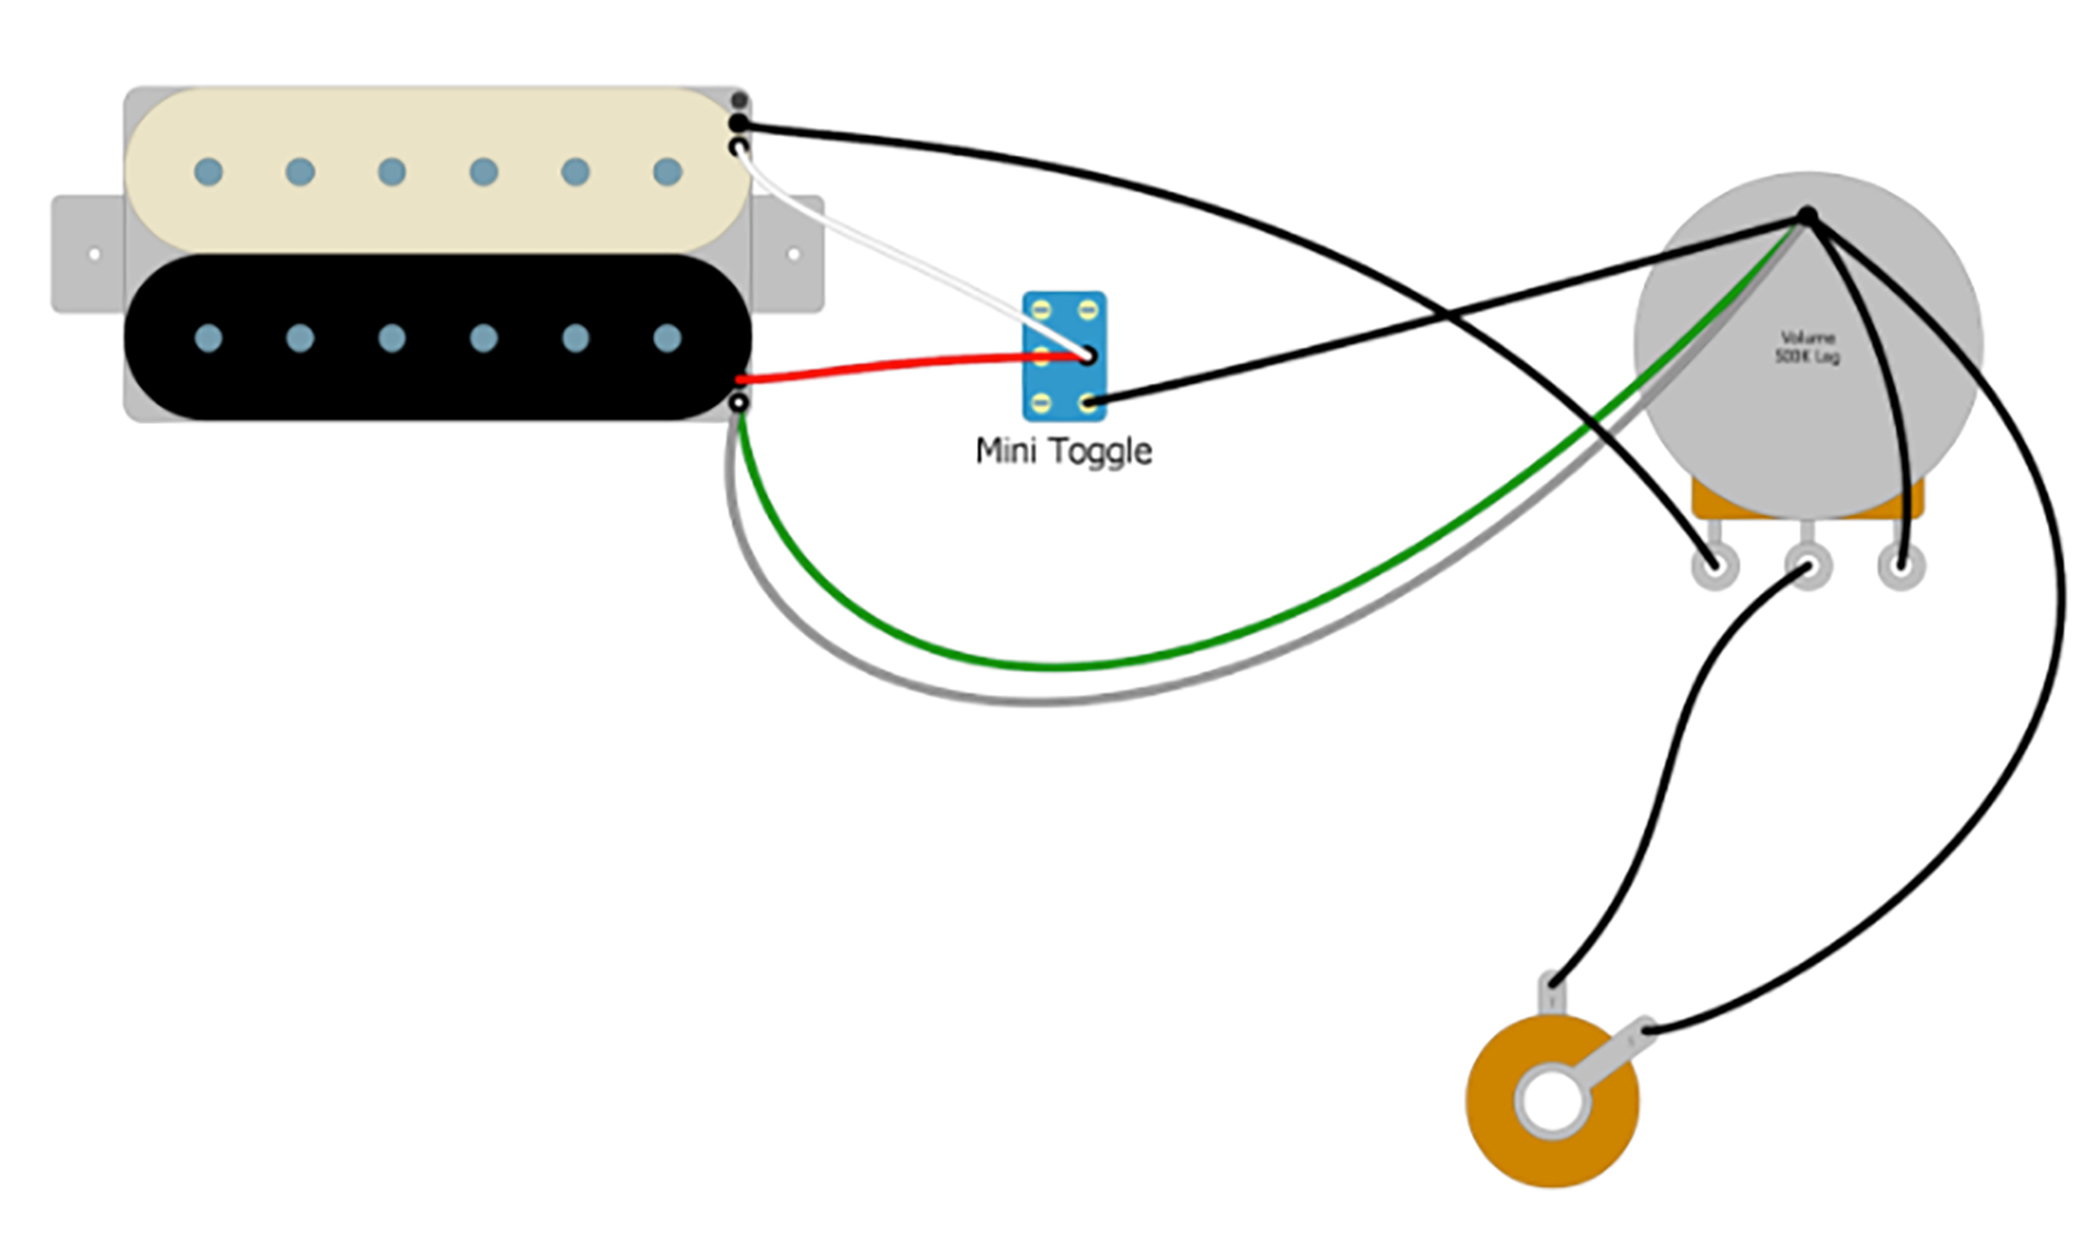 1 Fender Humbucker Series/Split/Parrallel 3 Way Toggle Switch Wiring Diagram from humbuckersoup.com